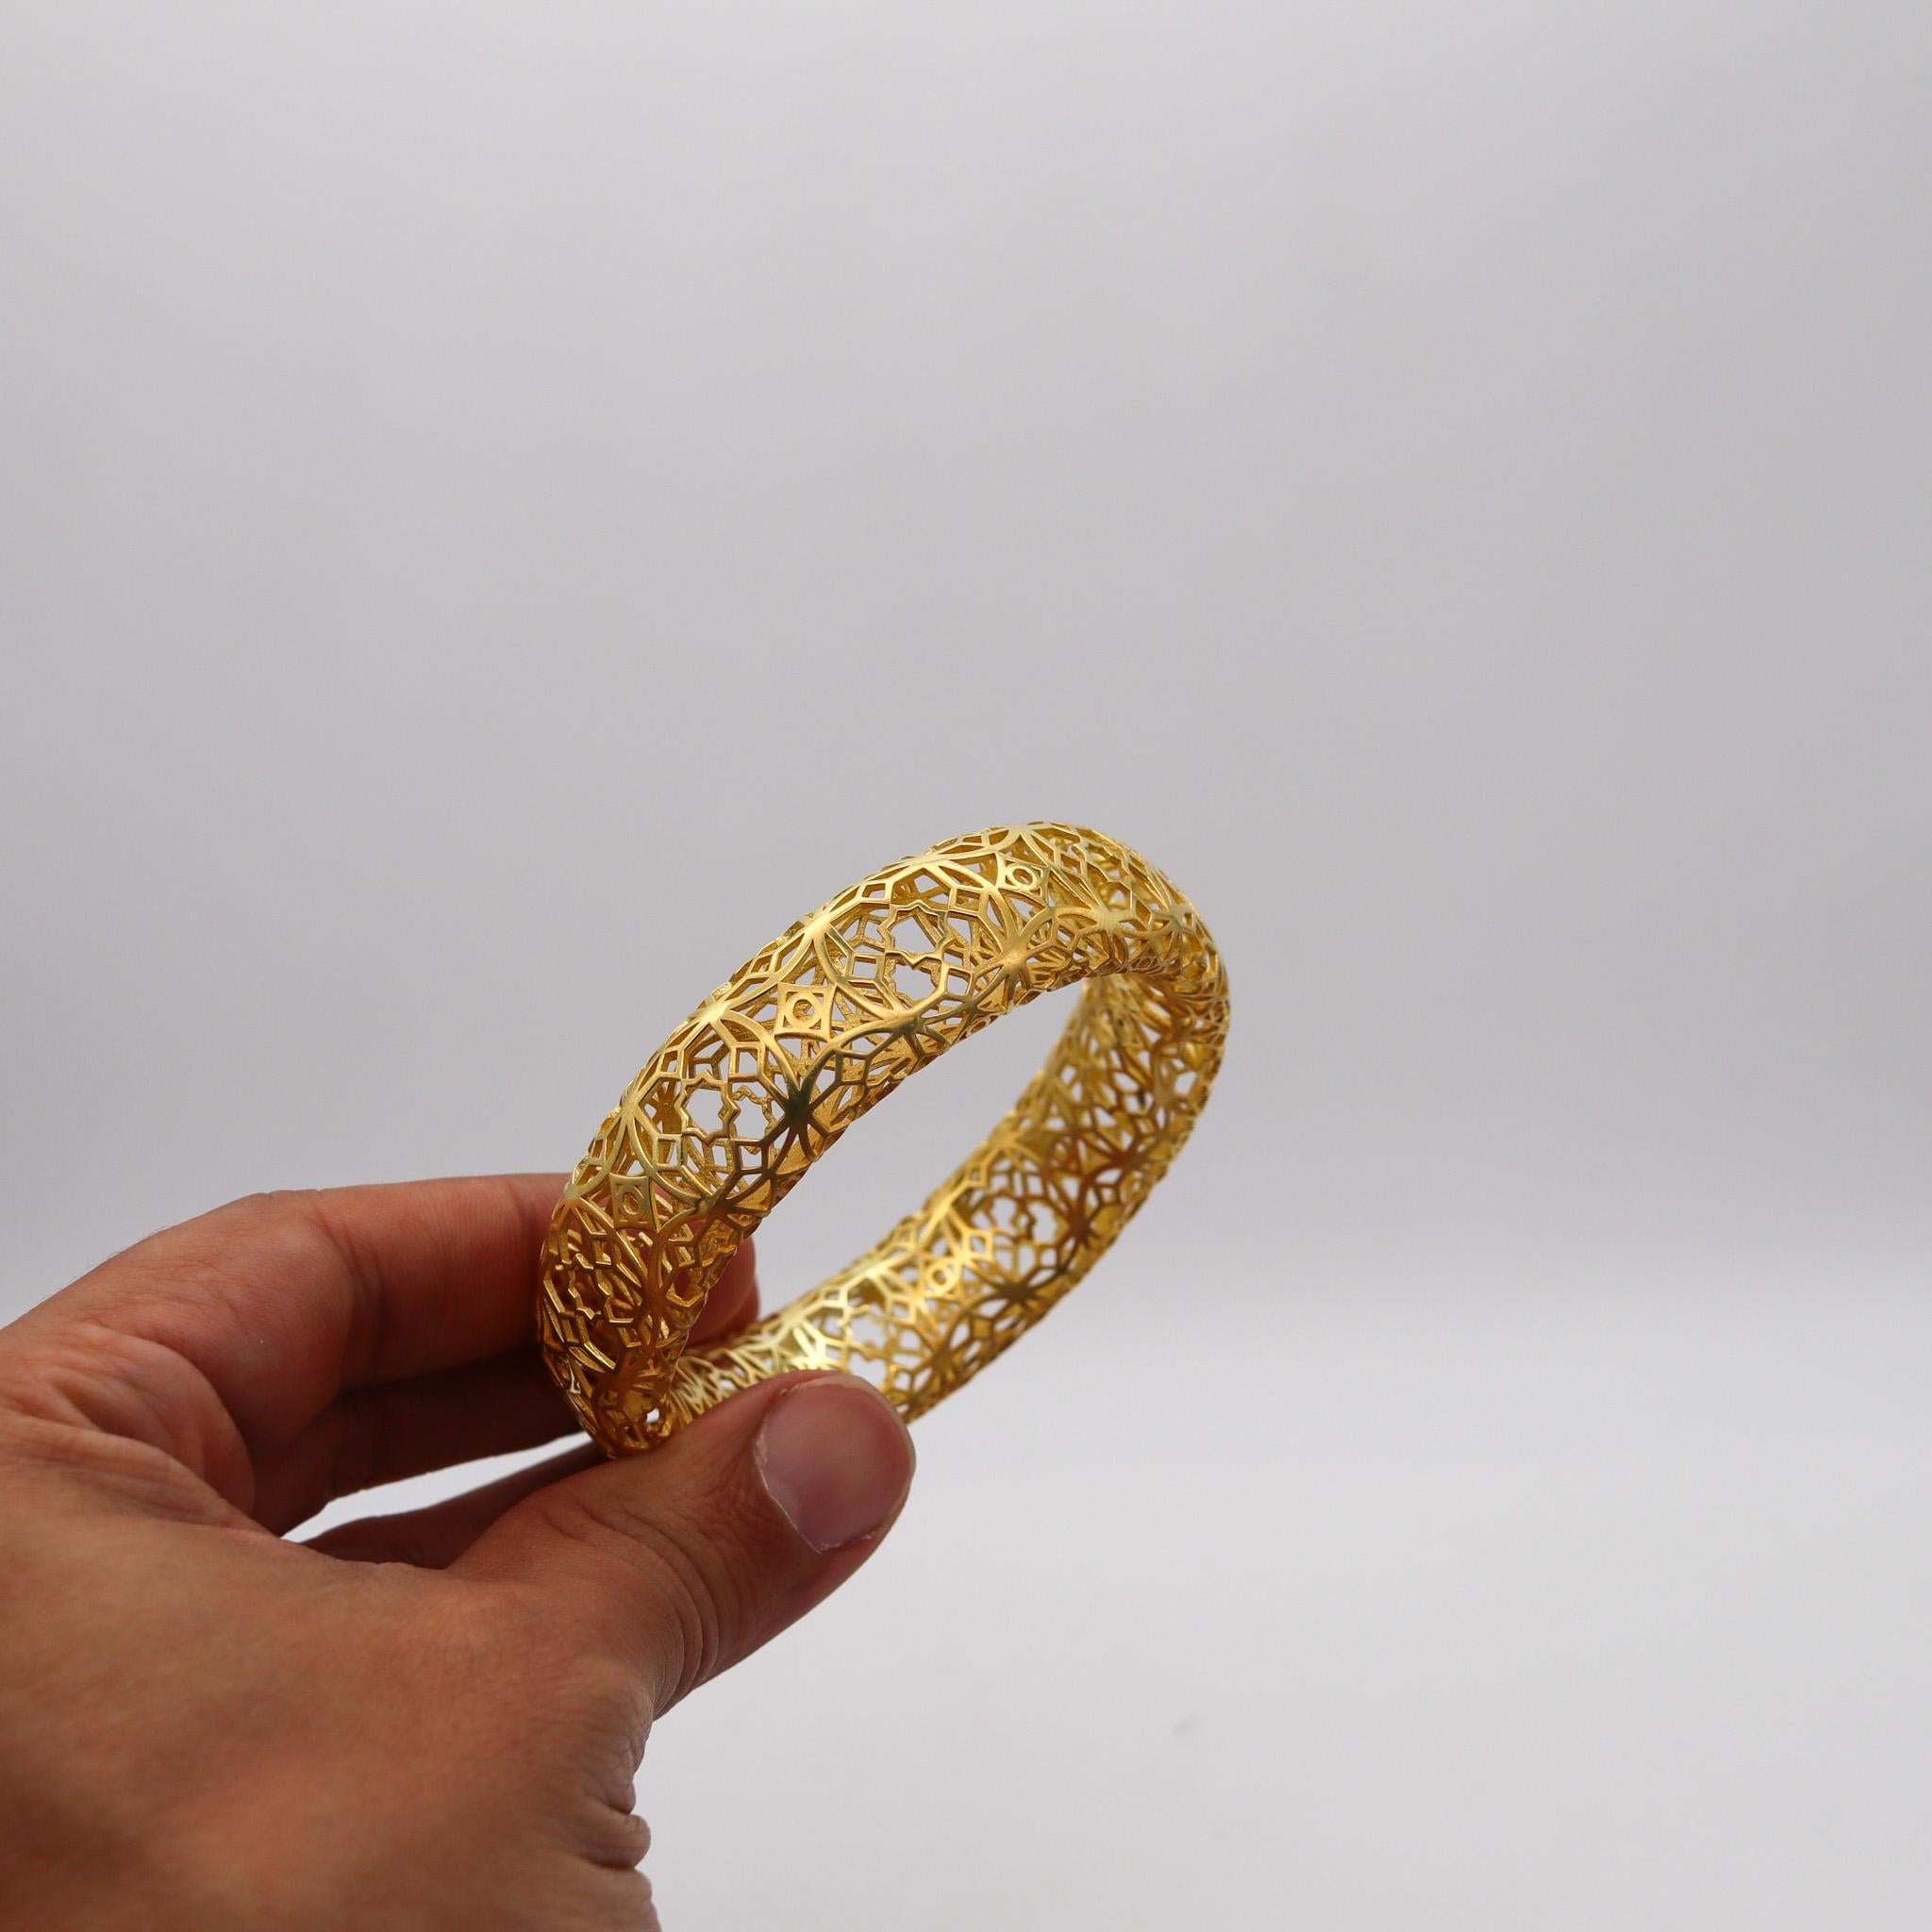 Marrakesh bangle bracelet designed by Paloma Picasso for Tiffany & Co.

Gorgeous tridimensional bangle bracelet, created by Paloma Picasso for the Tiffany Studios, This rare bracelet is from the iconic Marrakesh collection, crafted in 18Kt yellow